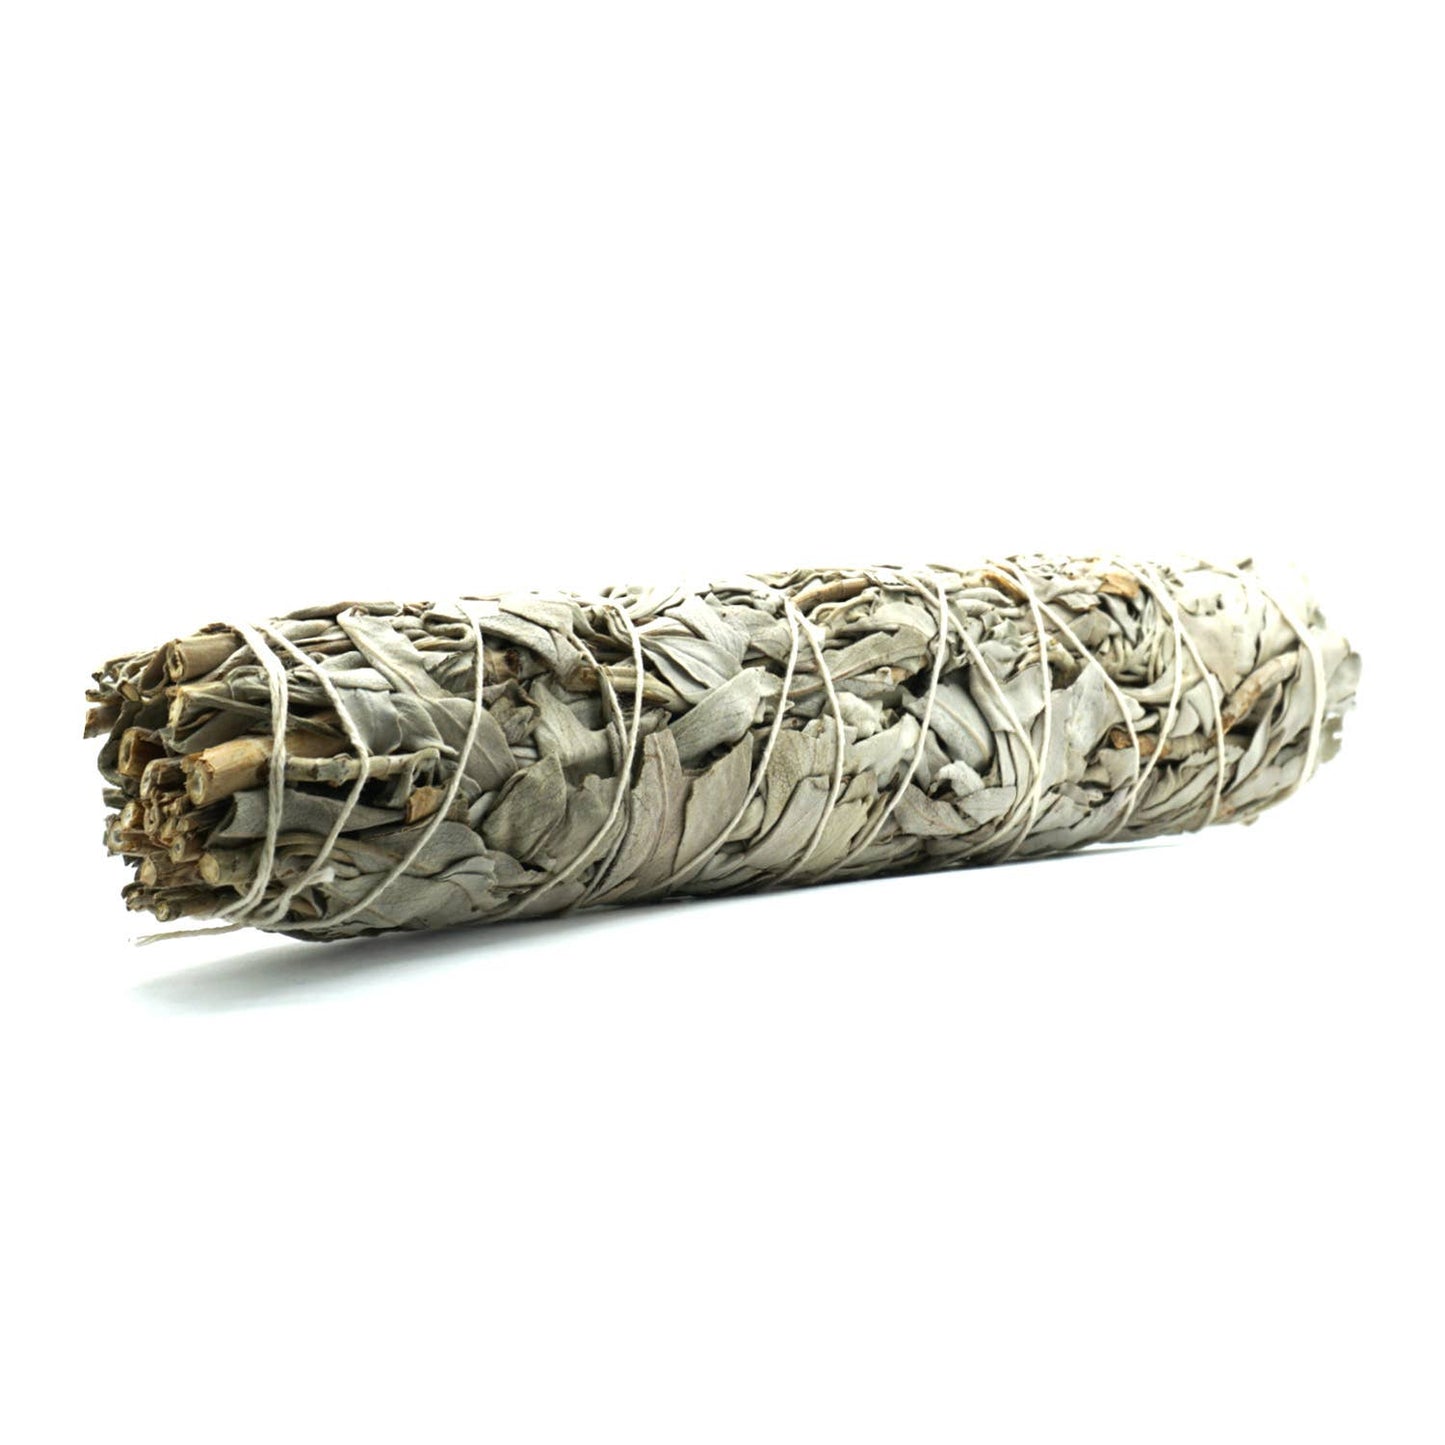 9 inch White Sage Bundles (Large) from Farm in California